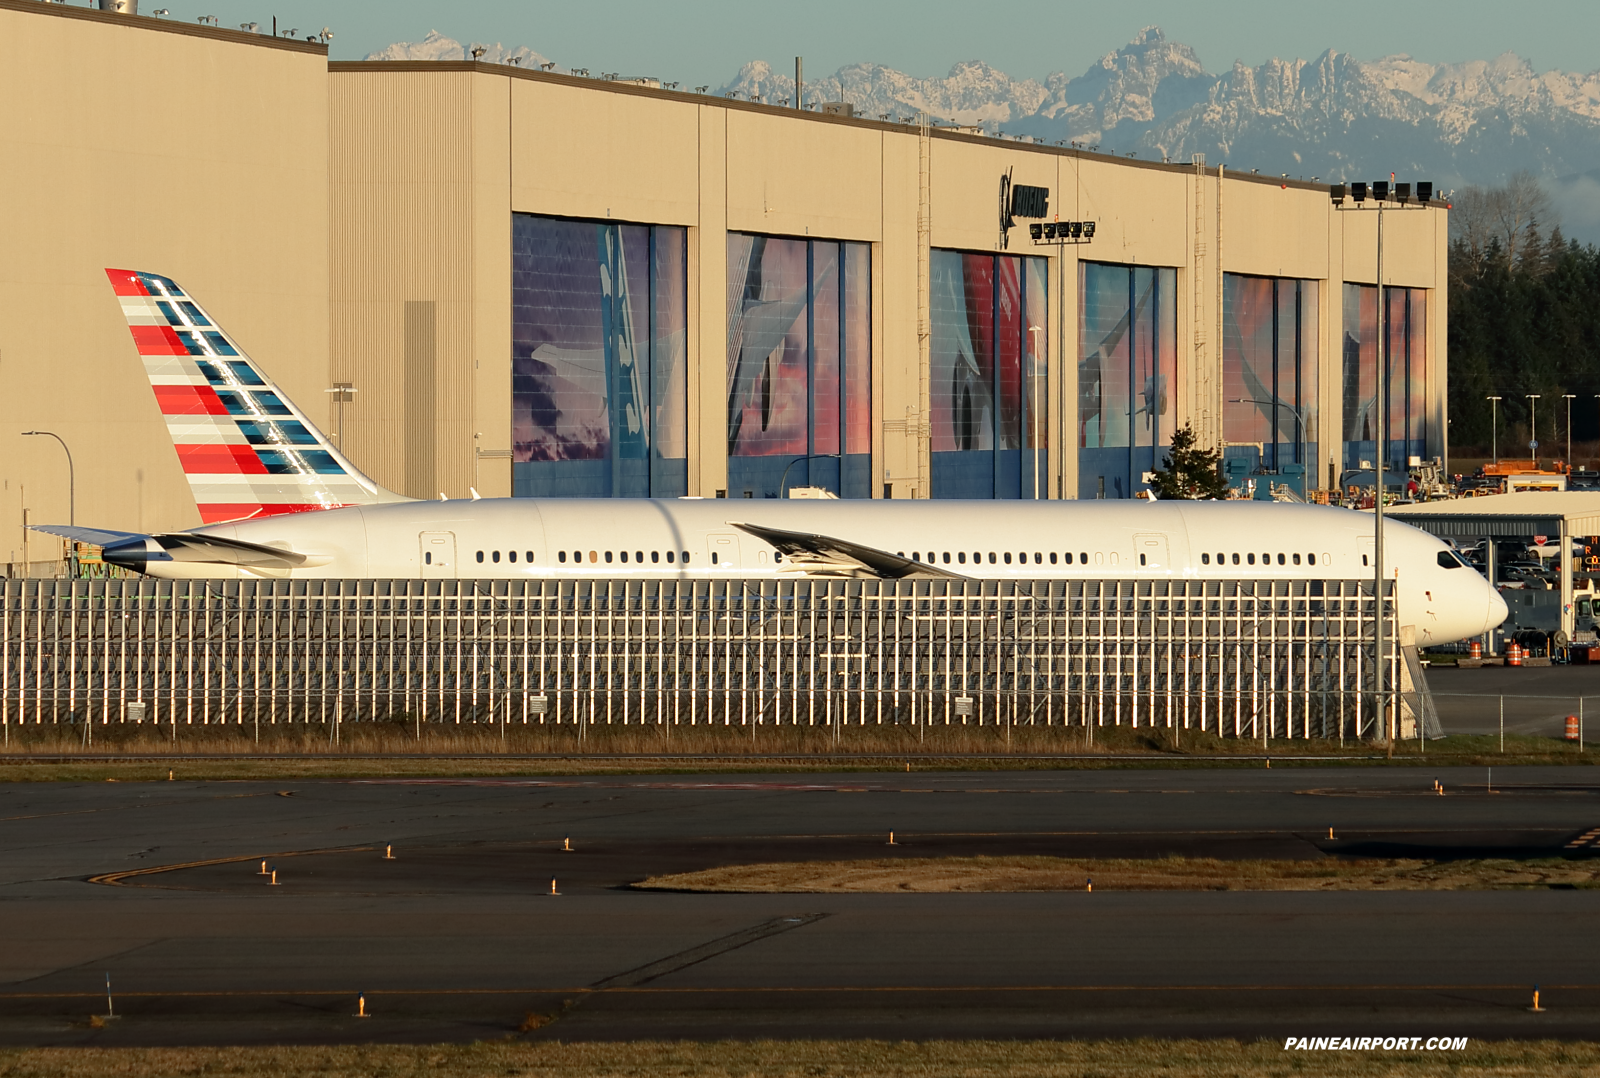 American Airlines 787-8 at KPAE Paine Field